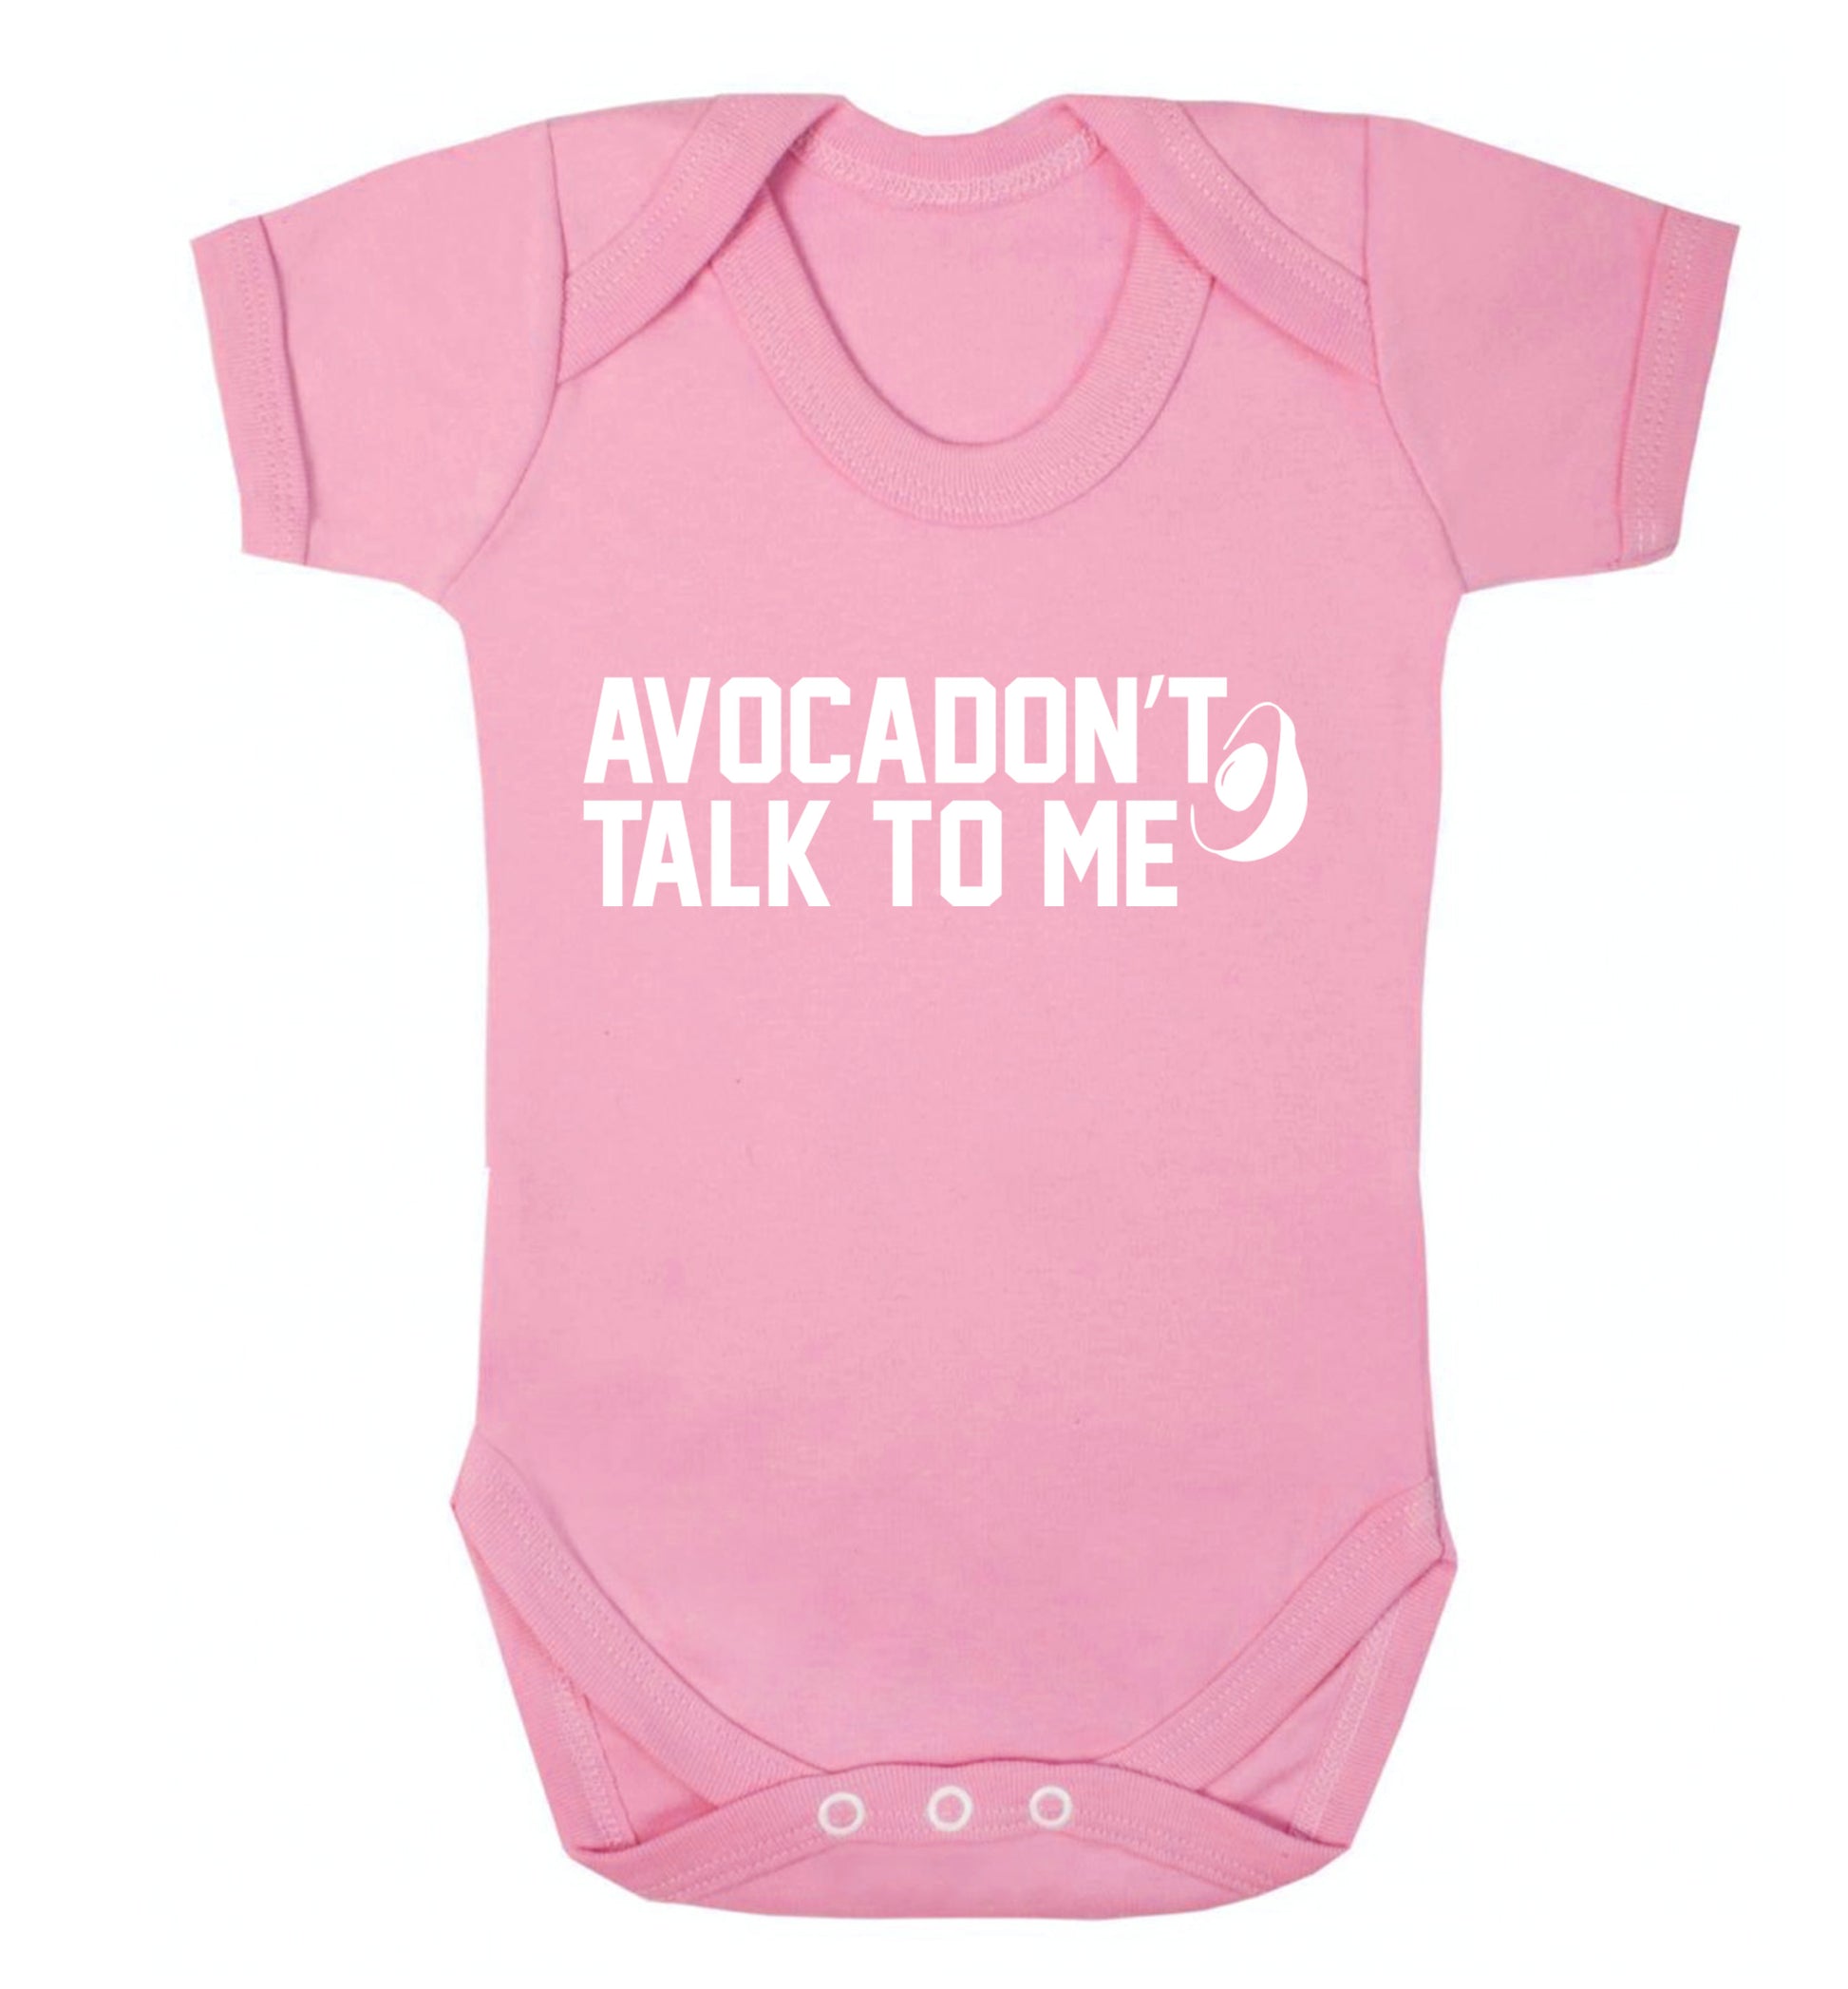 Avocadon't talk to me Baby Vest pale pink 18-24 months